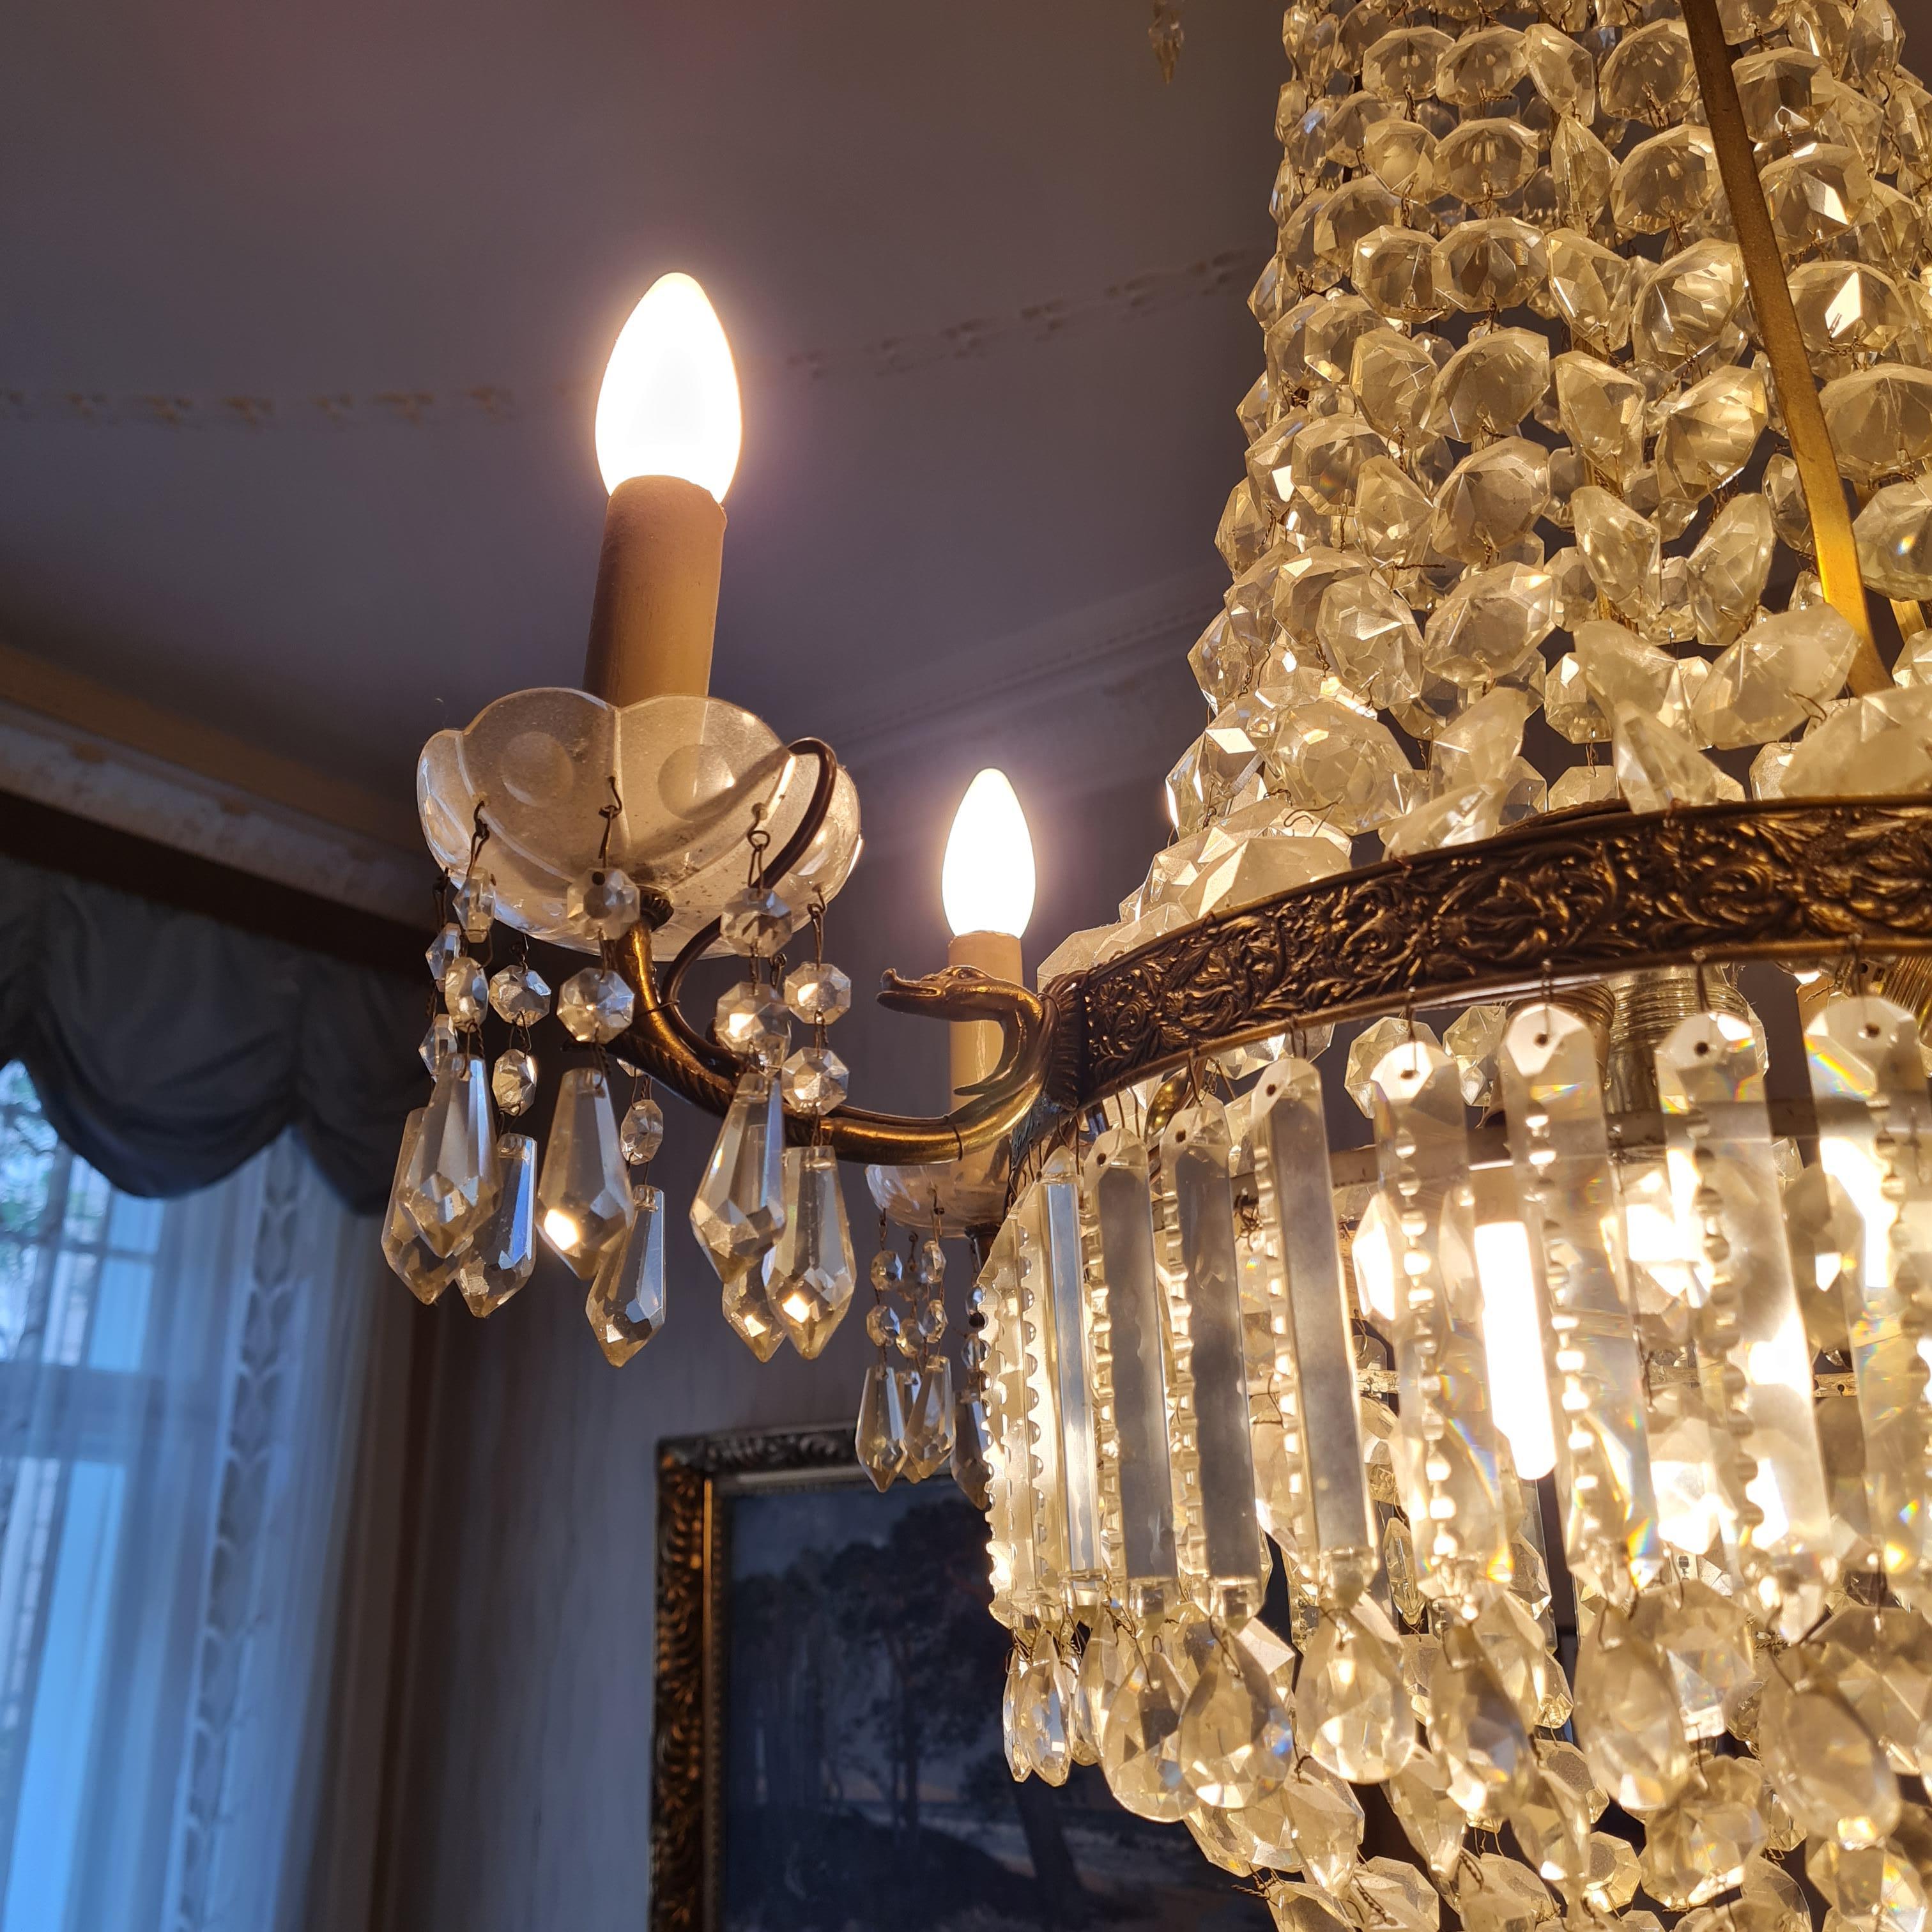 Empire style crystal chandelier decorated with rich ornamental brass patterns. The chandelier has 4 well chiseled brass arms that support the candles, 8 lights (4 external and 4 internal E14/ E27). Elegant and very bright chandelier has the shape of